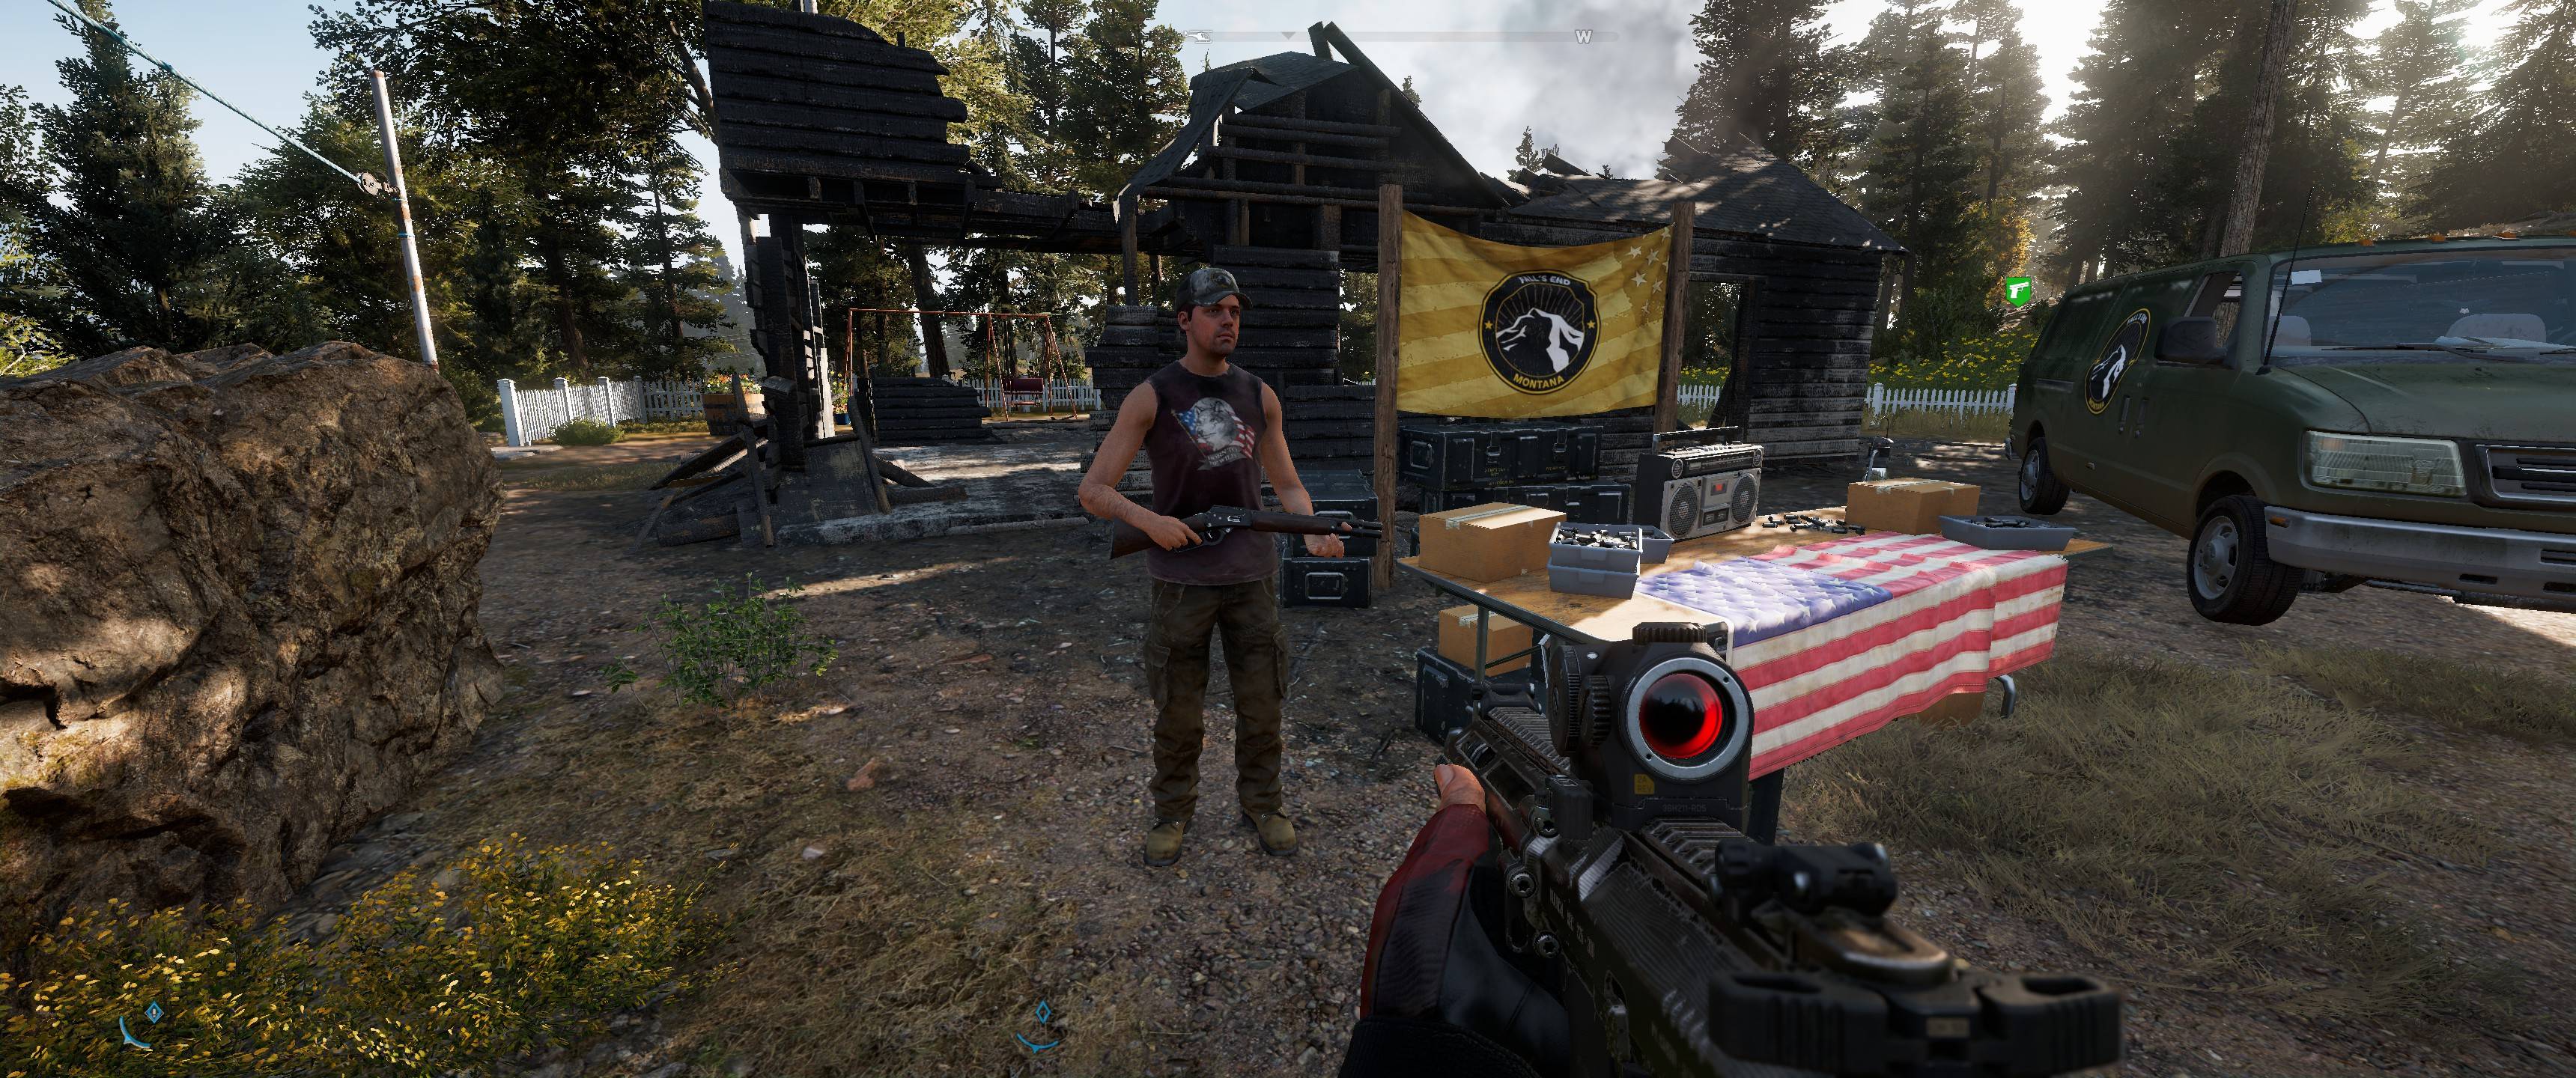 10 Best Far Cry 5 Mods You Can Install For Free – FandomSpot